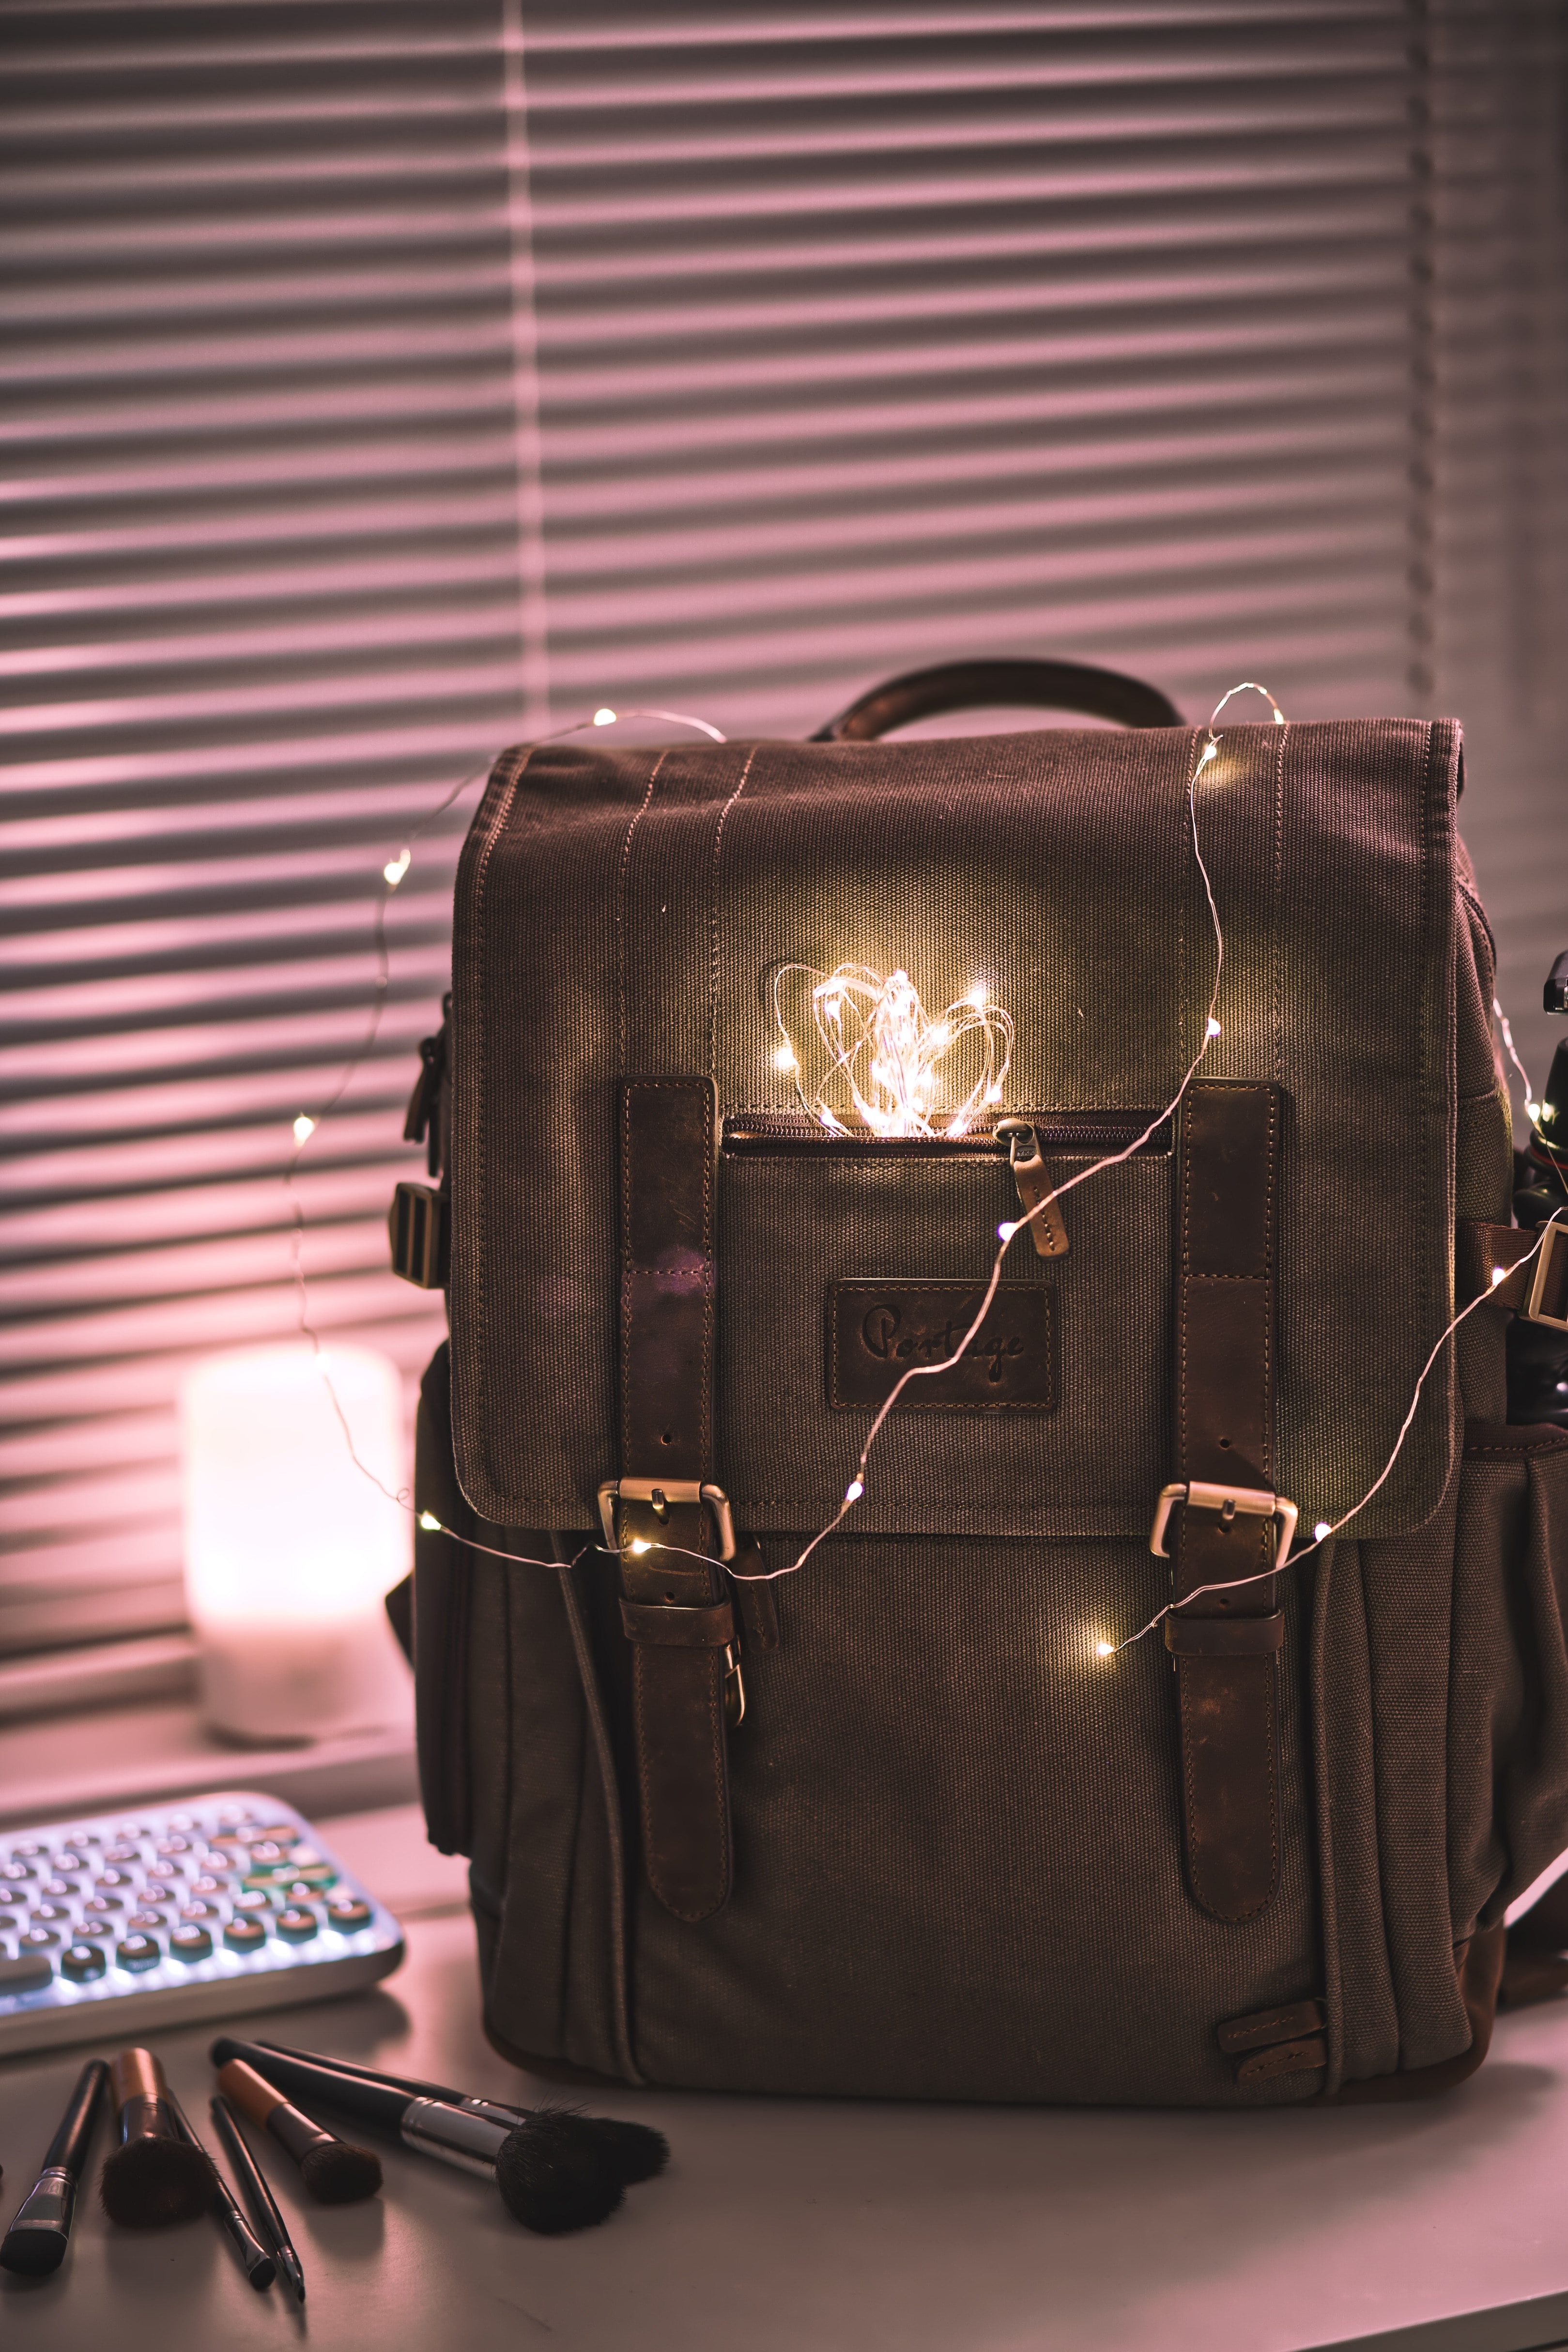 android light, backpack, miscellanea, garland, rucksack, shine, miscellaneous, glow